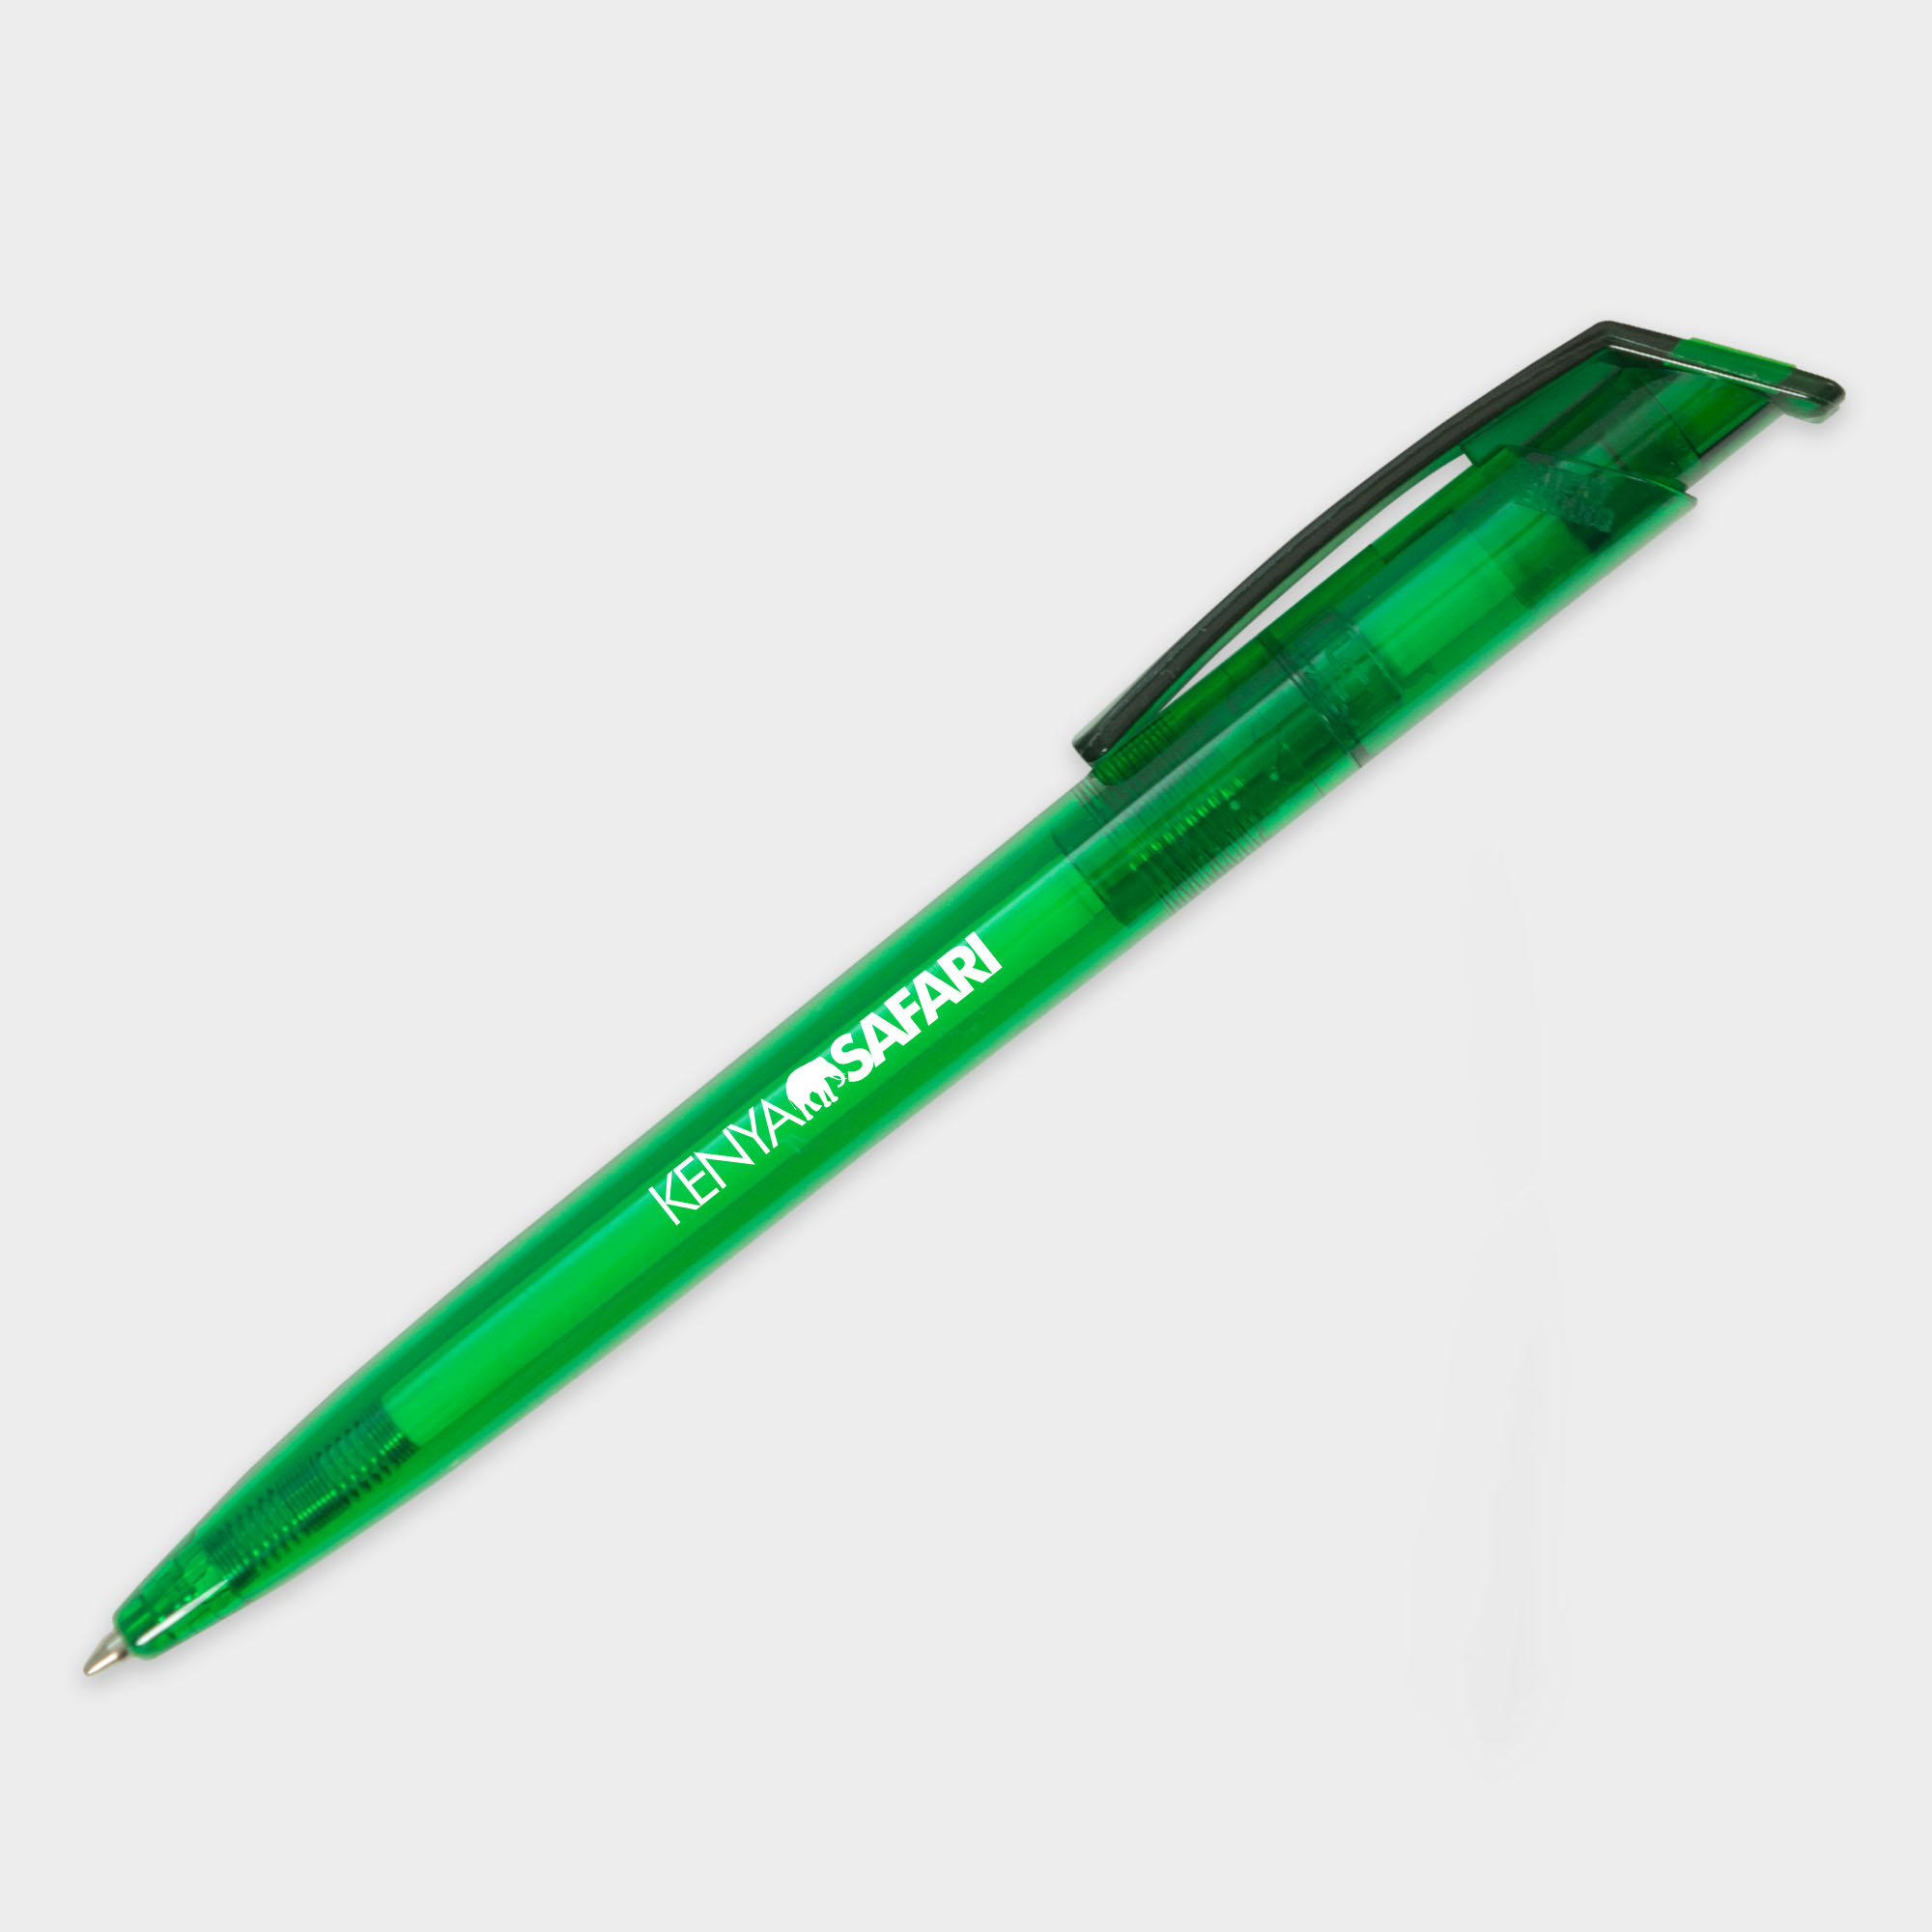 The Green & Good Litani Pen. An eco-friendly and high-quality pen made from recycled plastic bottles (rPET) with black ink refills and a frosted body. Made in the EU and available in a variety of colours. Green